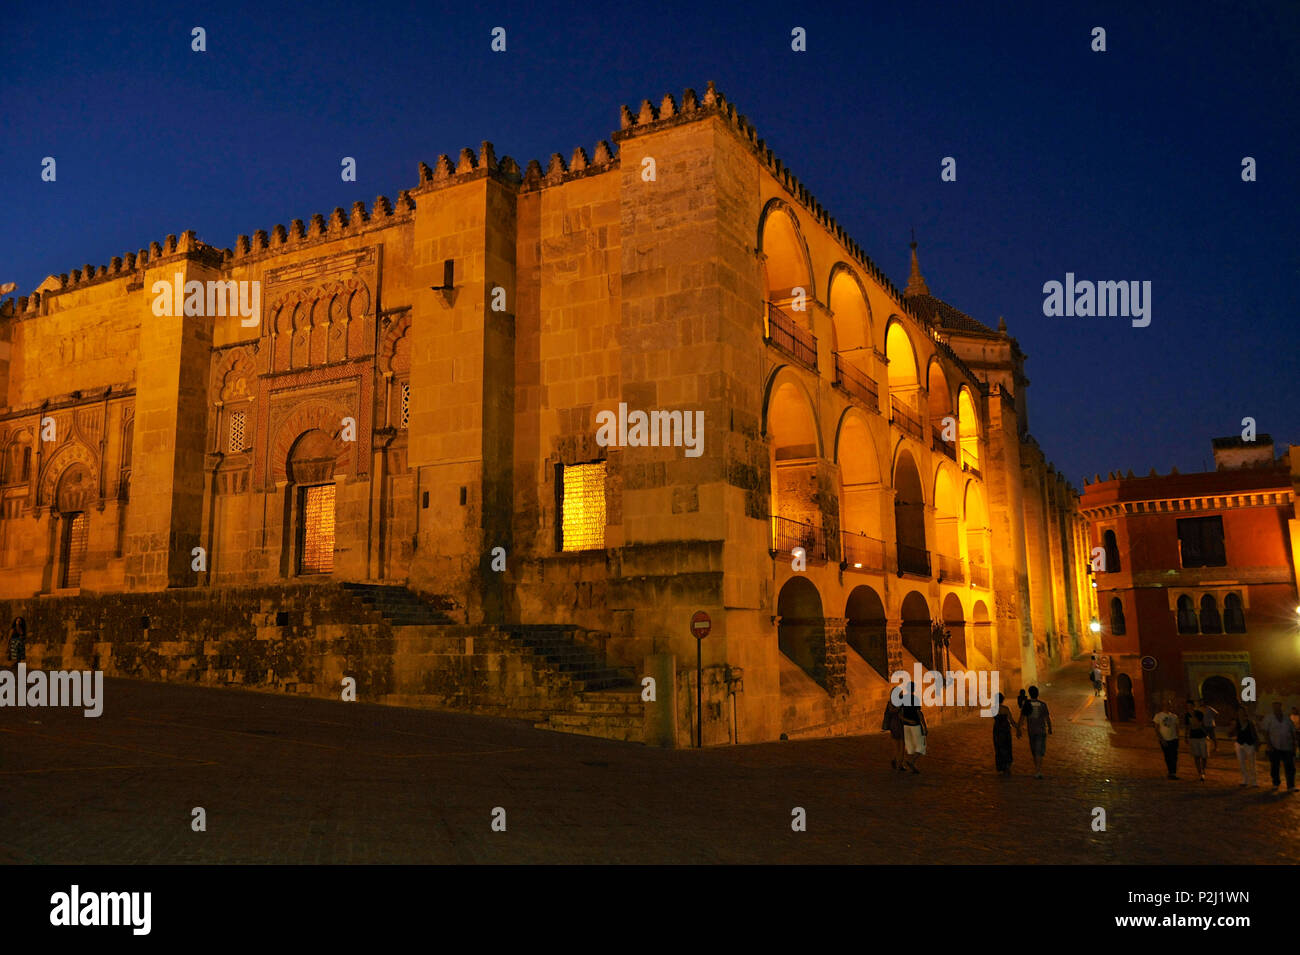 Outside view of the Mezquita in the evening, Cordoba, Andalusia, Spain Stock Photo